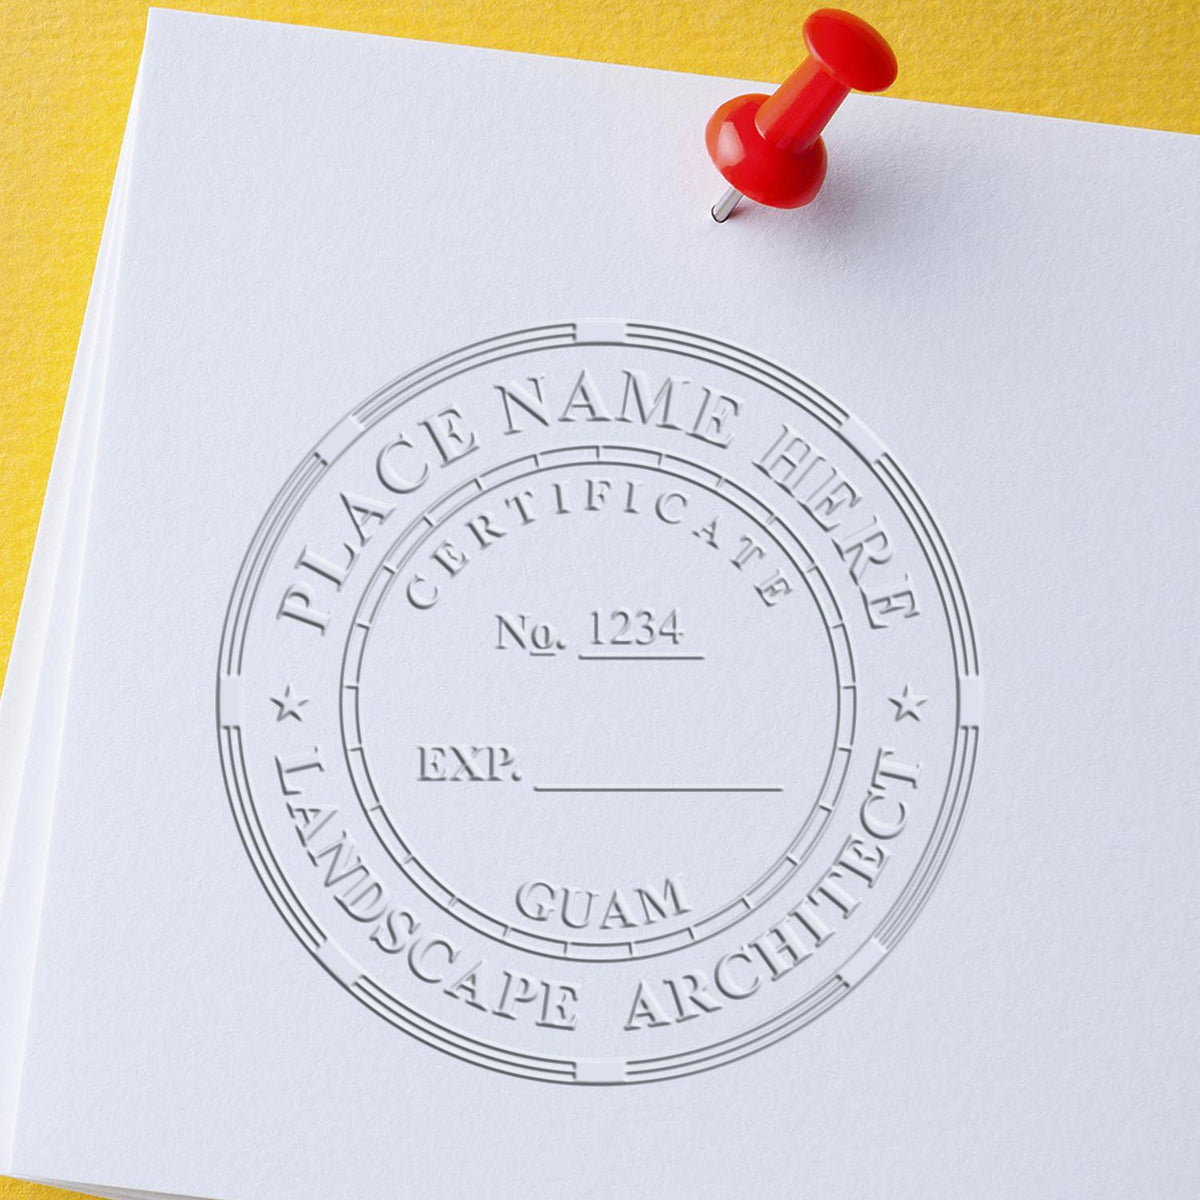 The Gift Guam Landscape Architect Seal stamp impression comes to life with a crisp, detailed image stamped on paper - showcasing true professional quality.